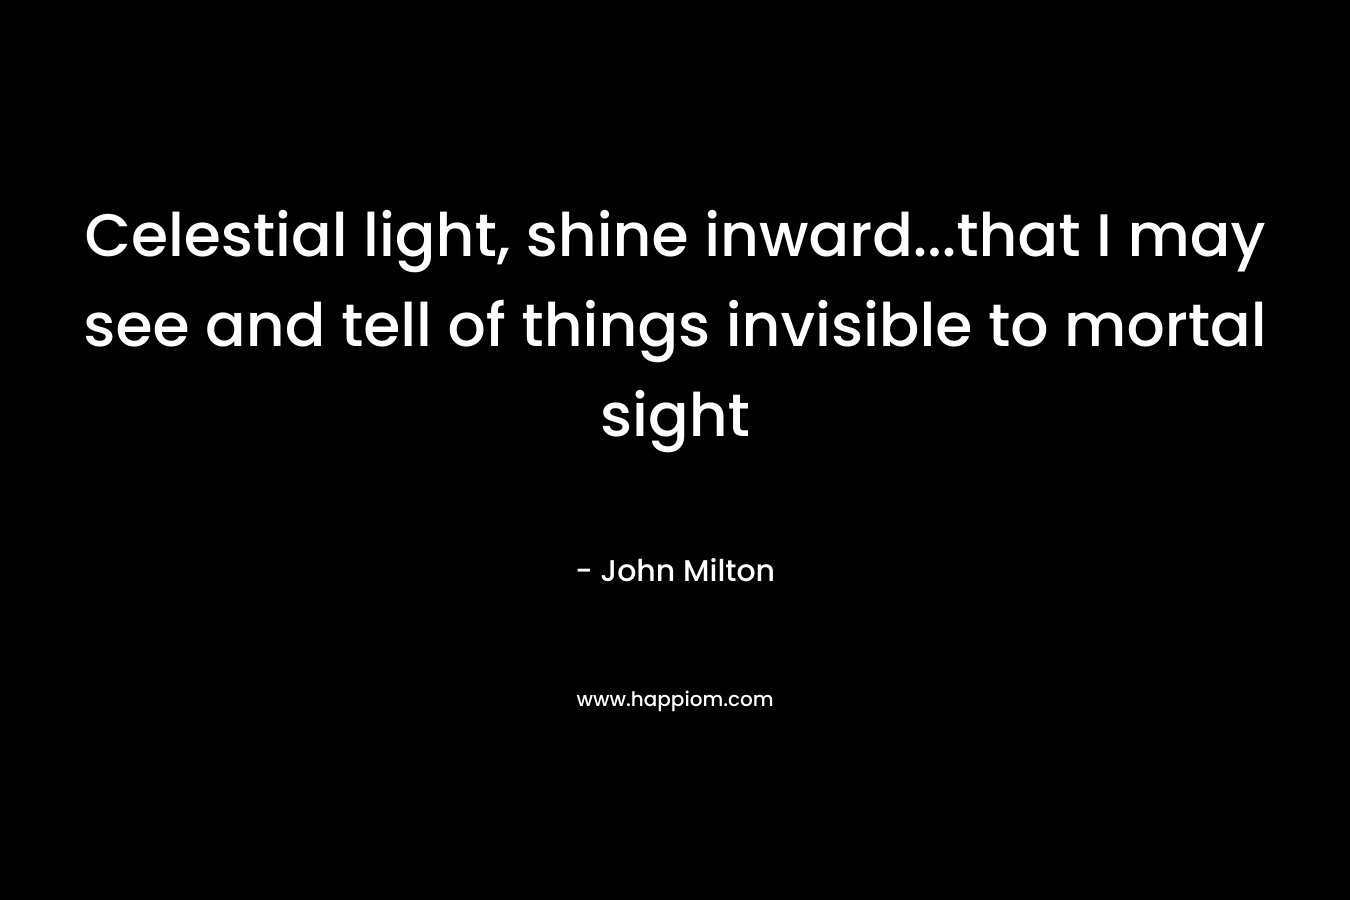 Celestial light, shine inward...that I may see and tell of things invisible to mortal sight